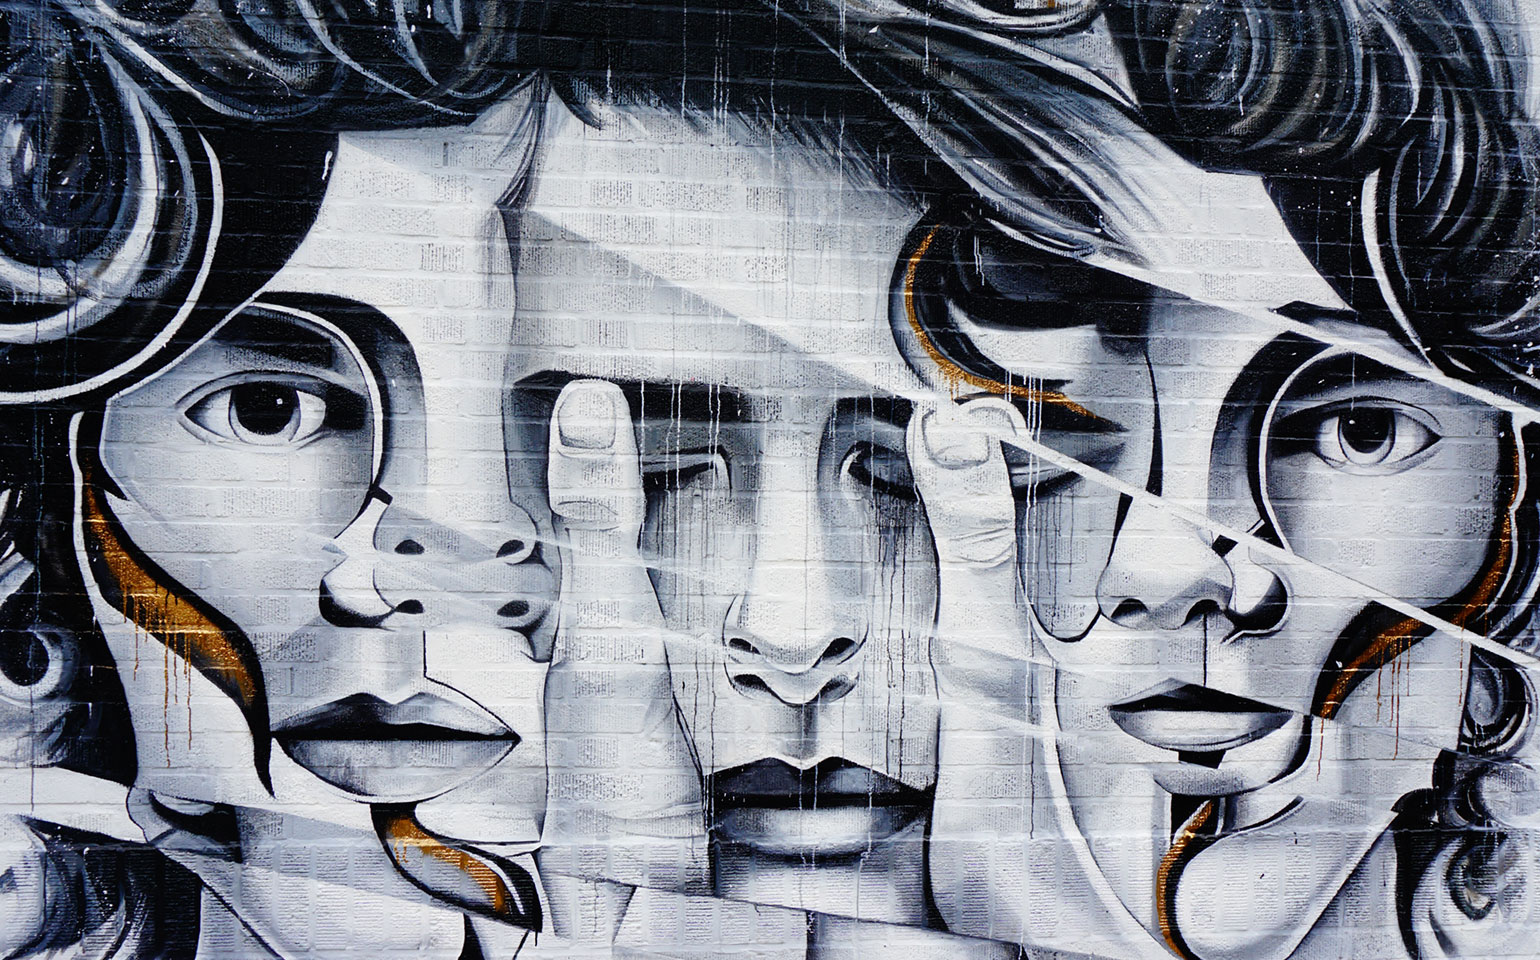 Multiple faces appear on a canvas. Each face shows a different mood.